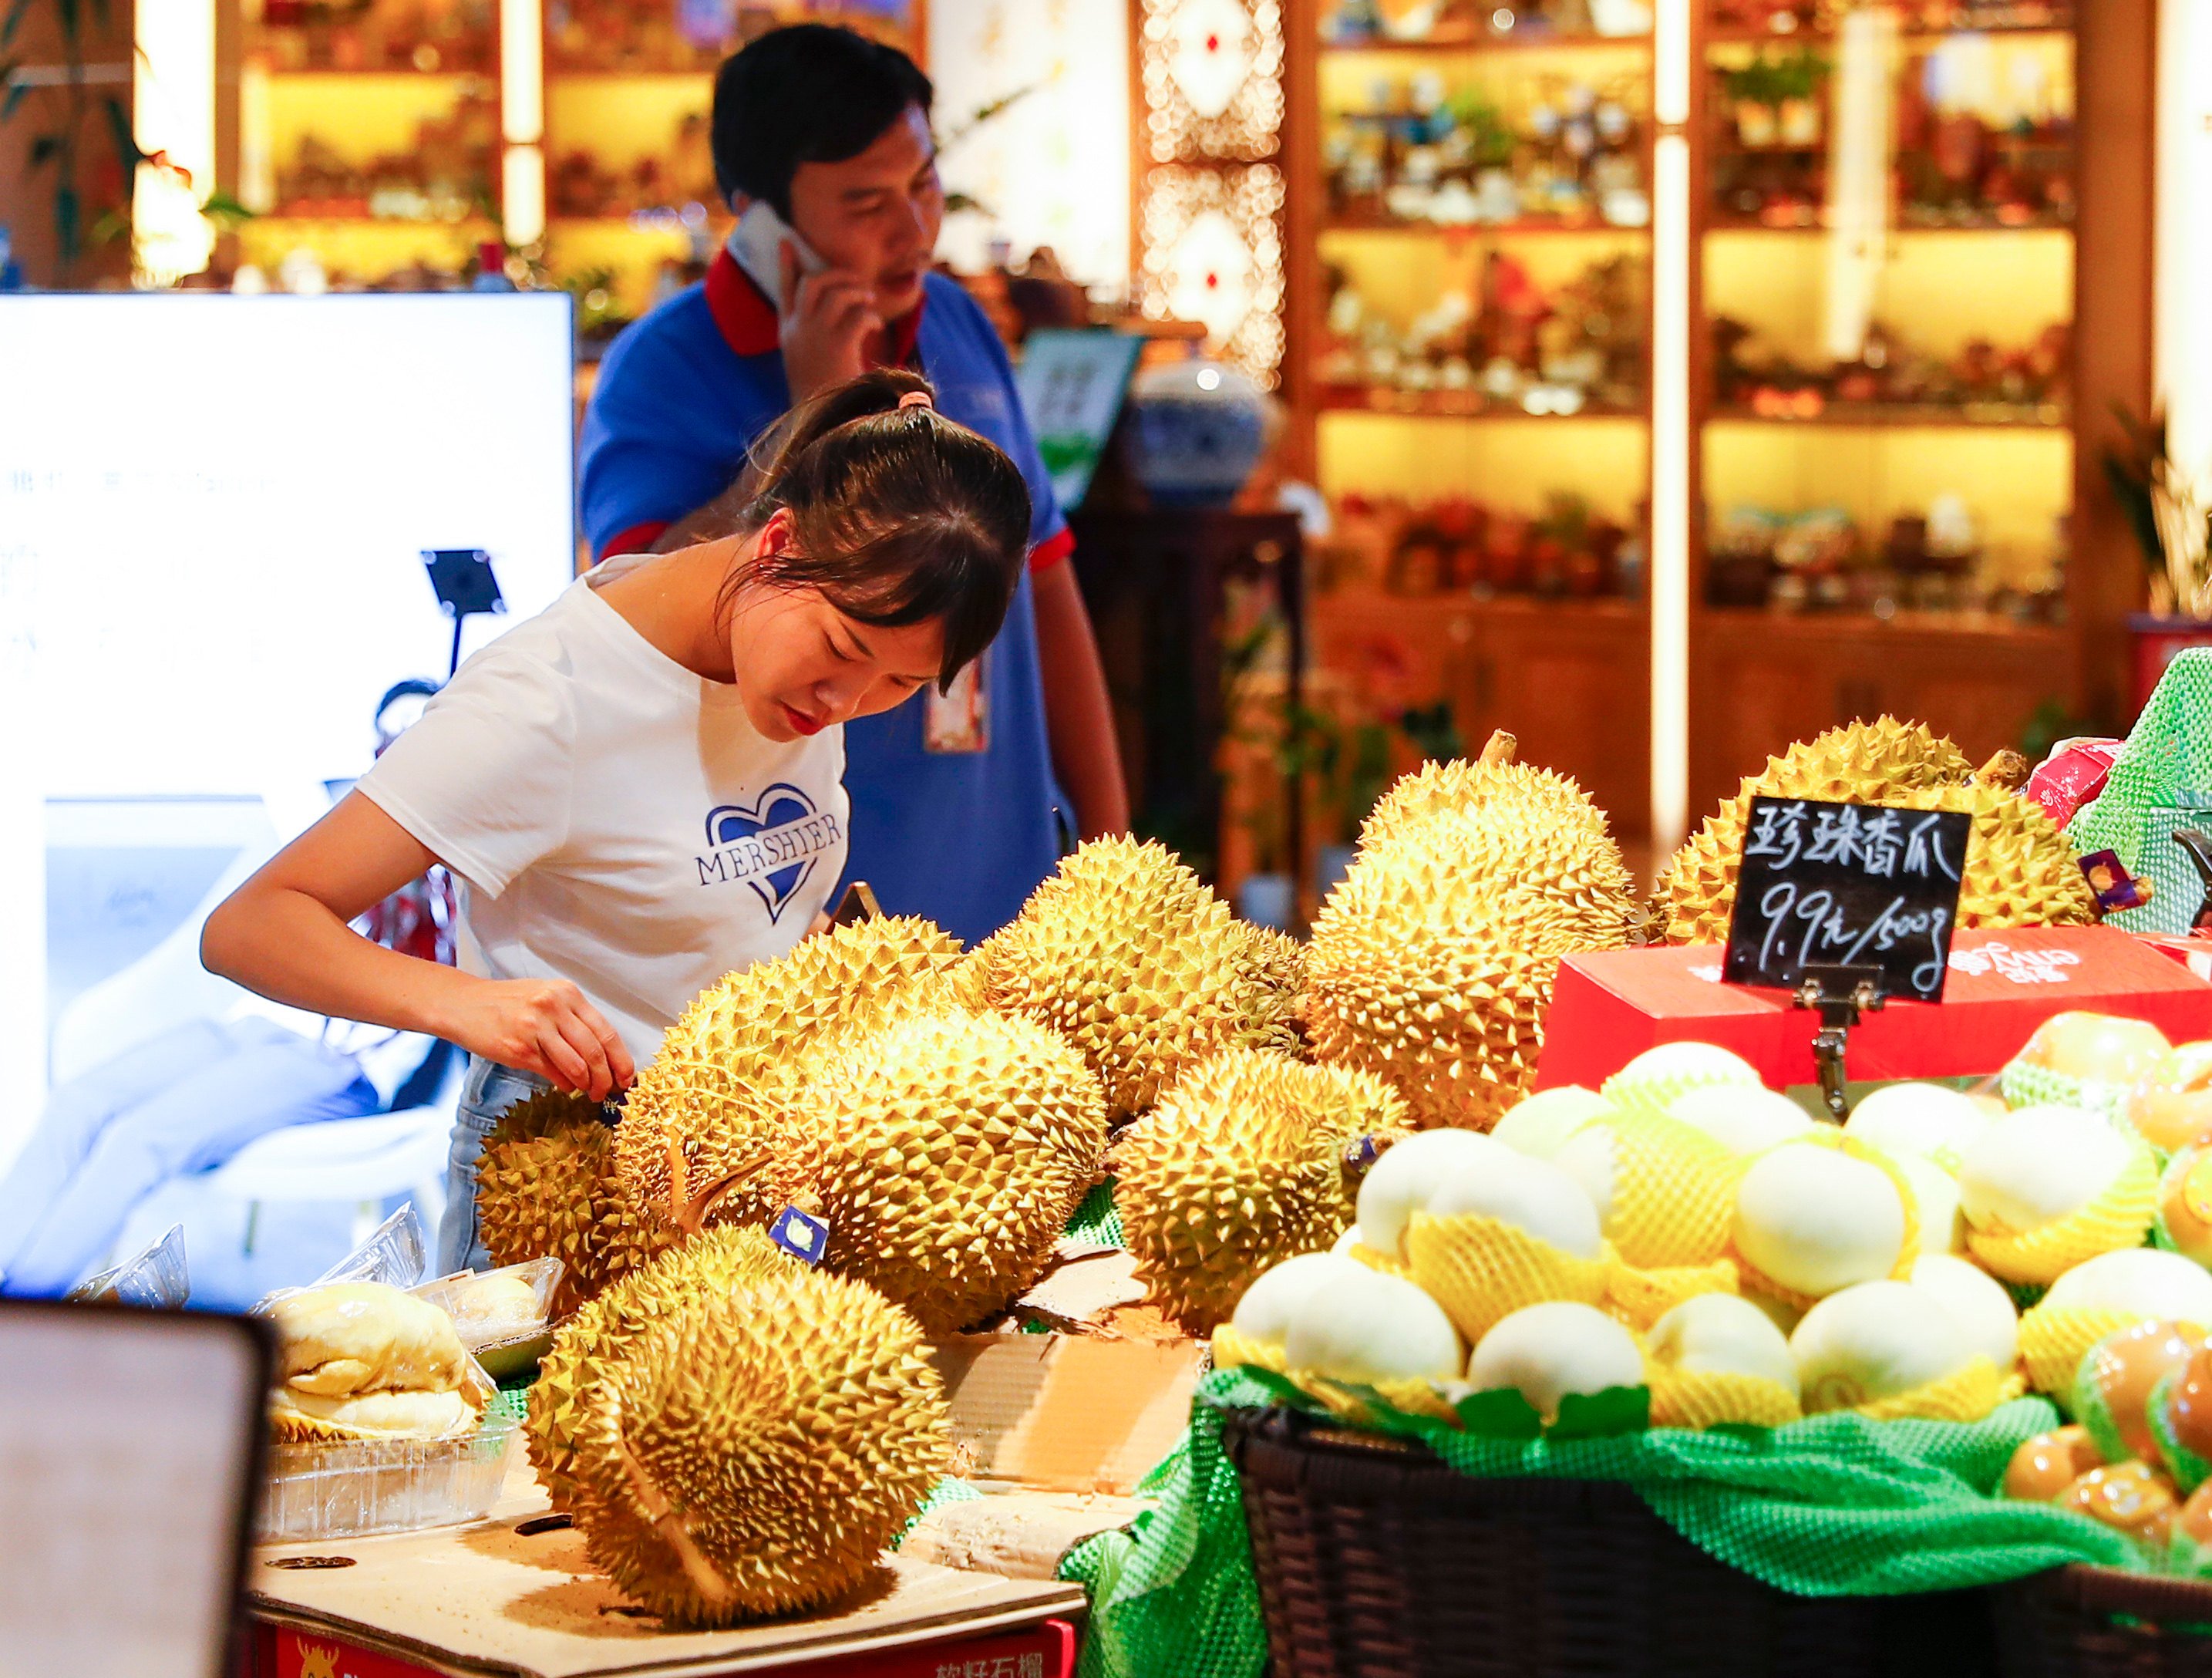 A shopper chooses among imported durian at a supermarket in Nanning, in southern Guangxi Zhuang Autonomous Region, on September 7. The notoriously odorous fruit has rapidly gained popularity among China’s middle-class consumers, creating a surge in imports and another avenue through which China and Vietnam are closely linked. Photo: Xinhua